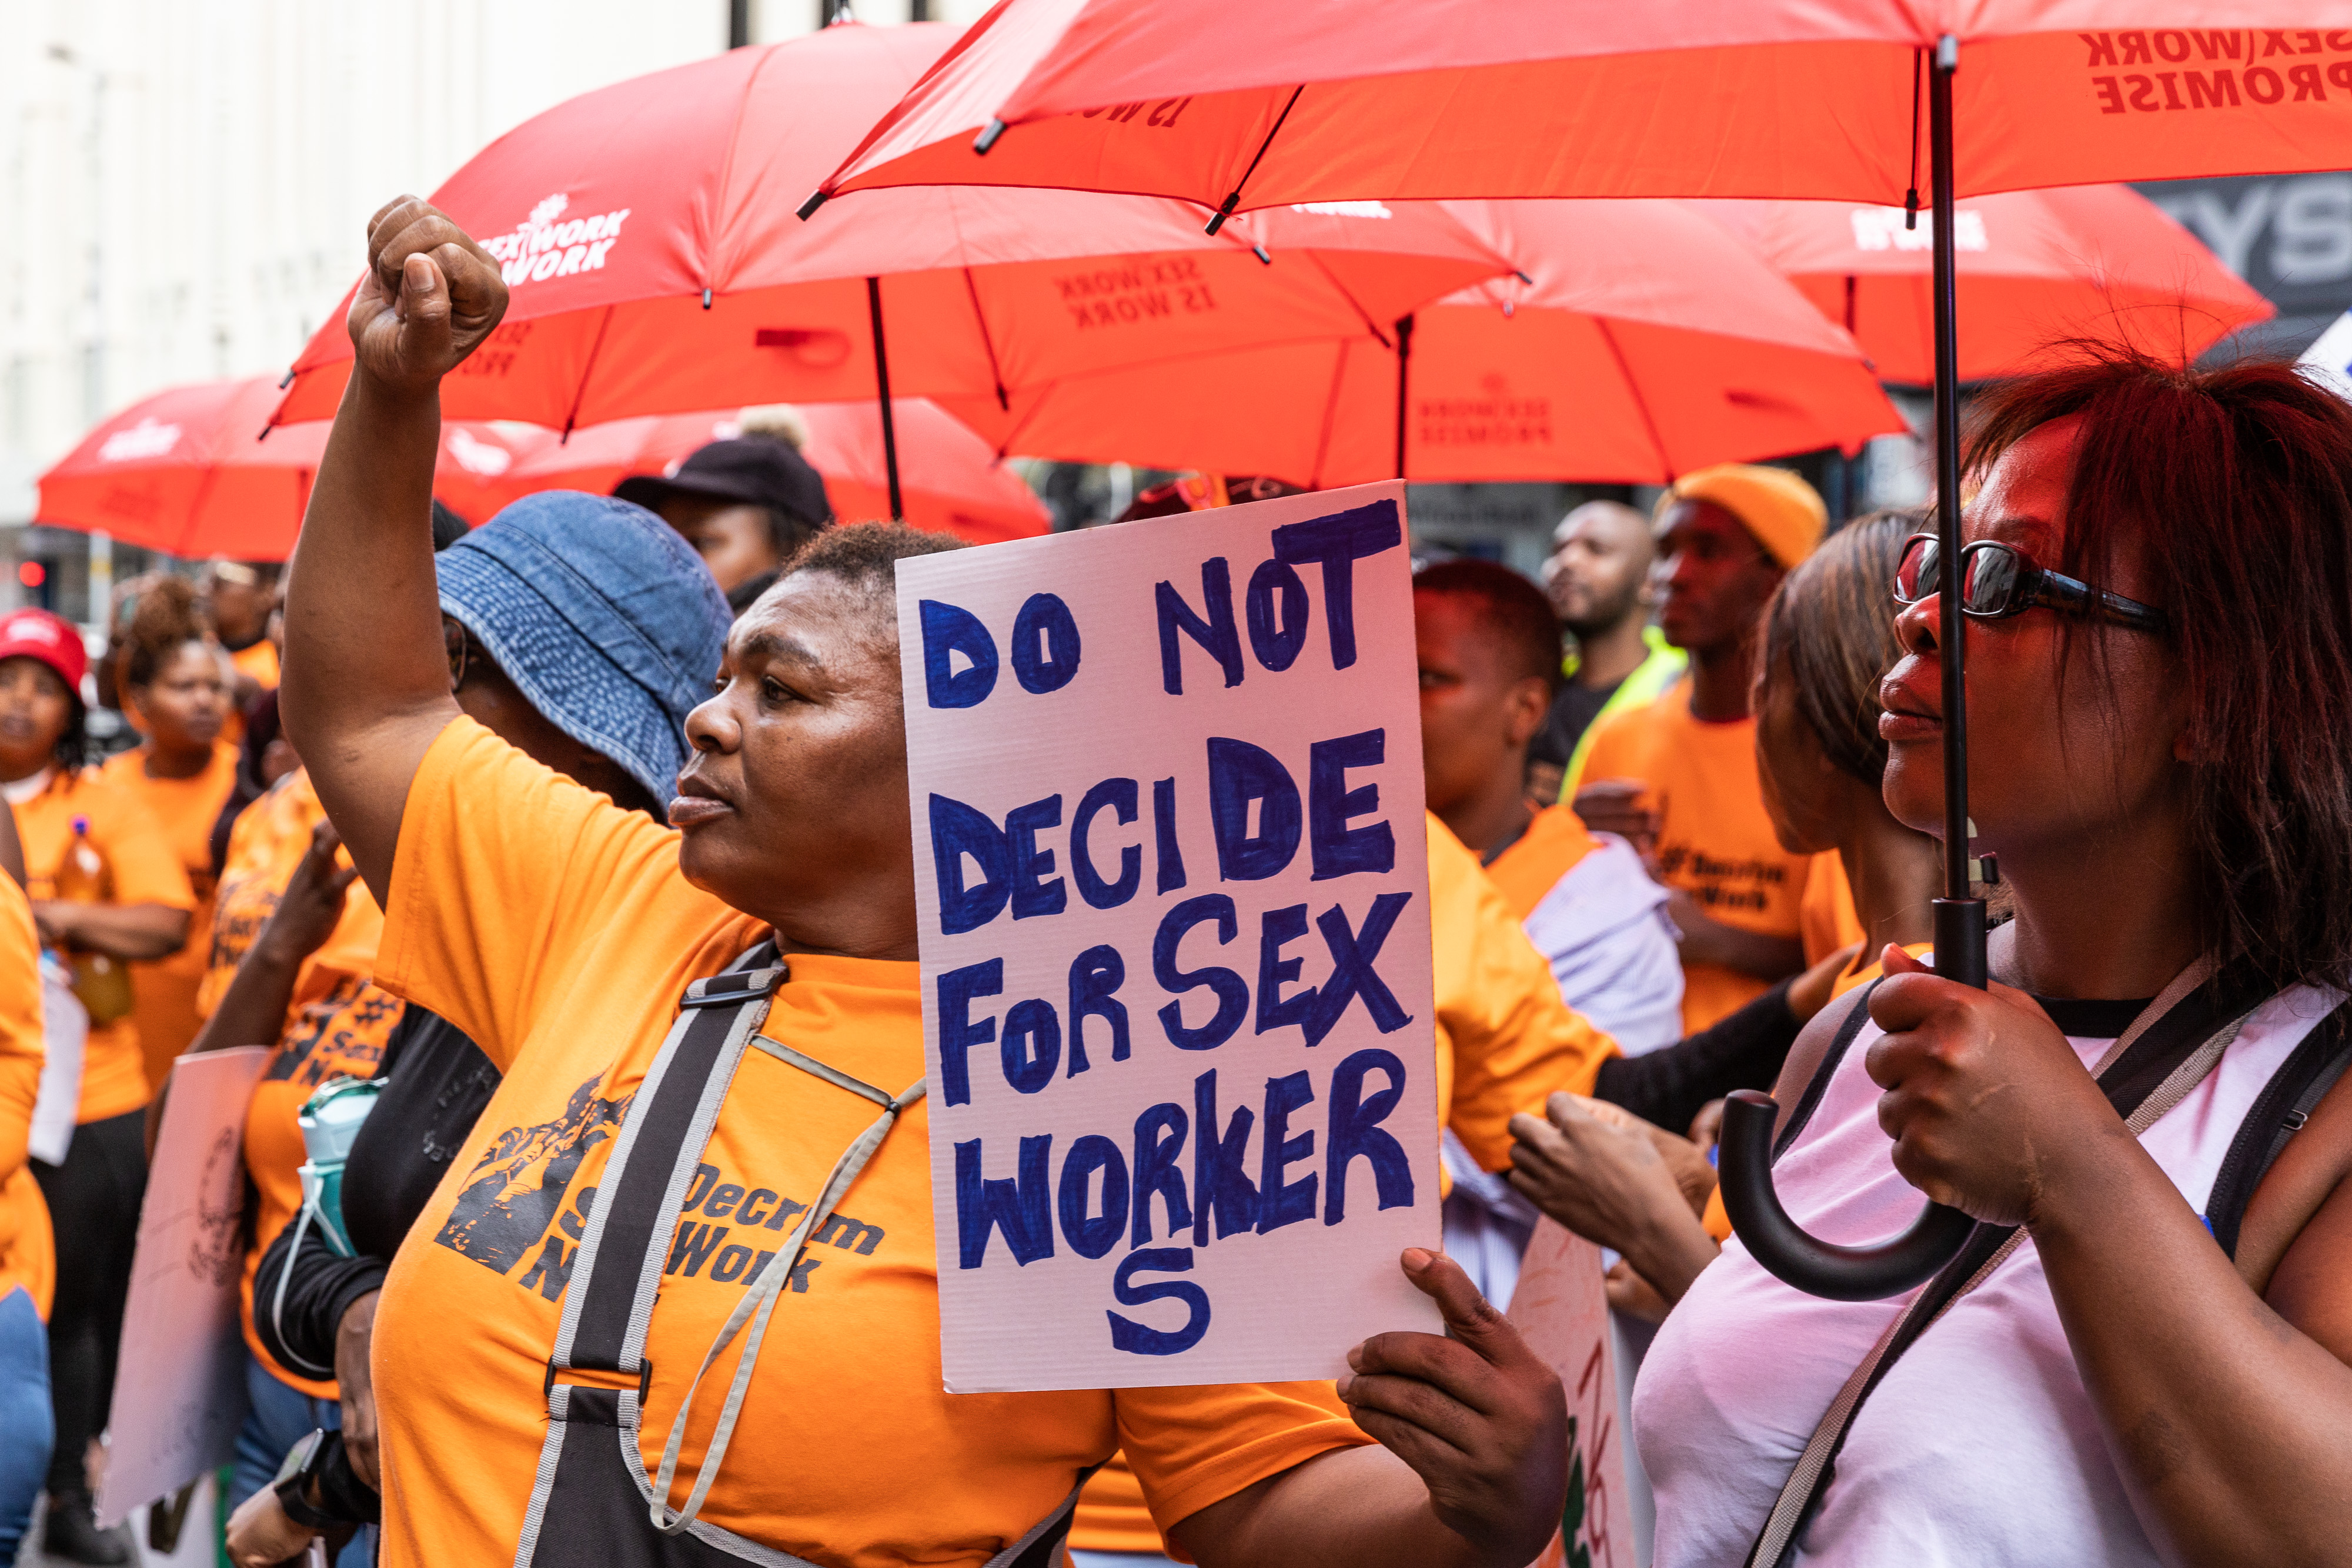 Sex workers and allies rally in Cape Town, demand full